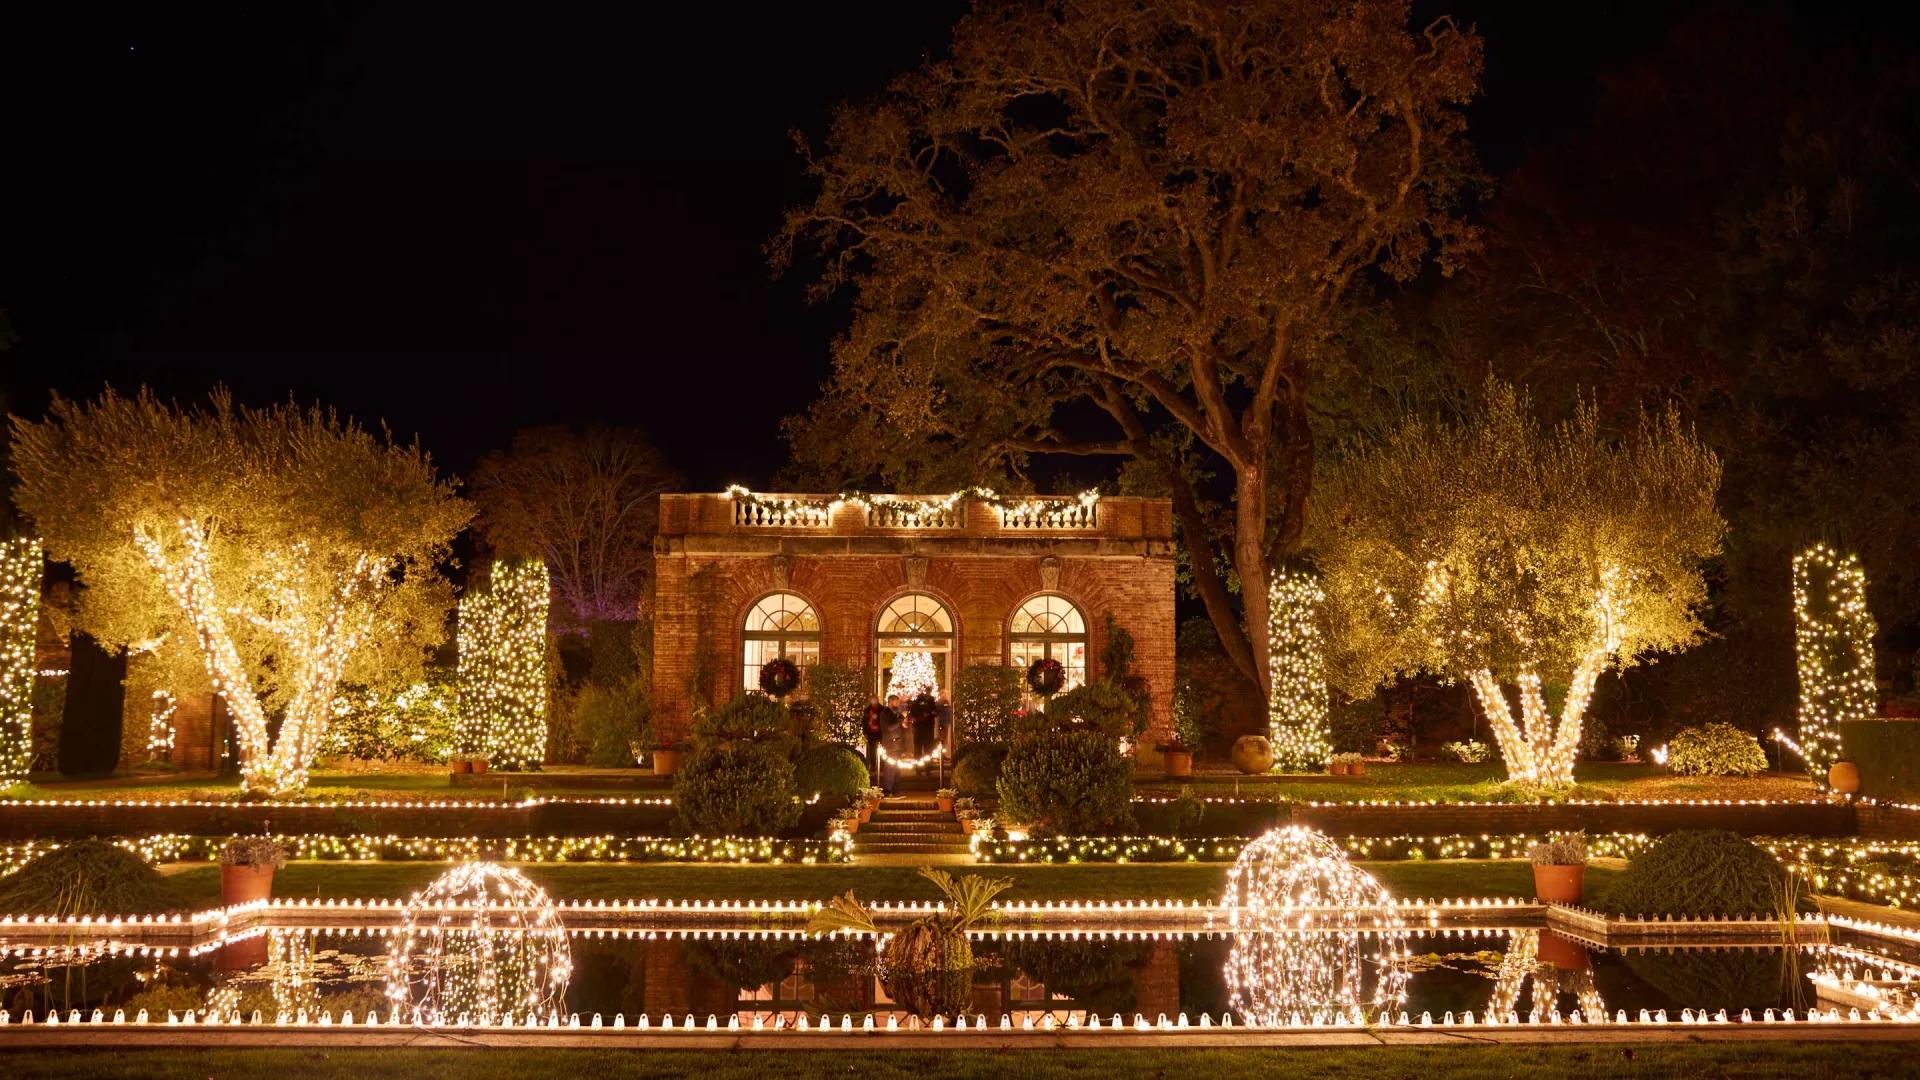 Large manor house is lit up by lights at night